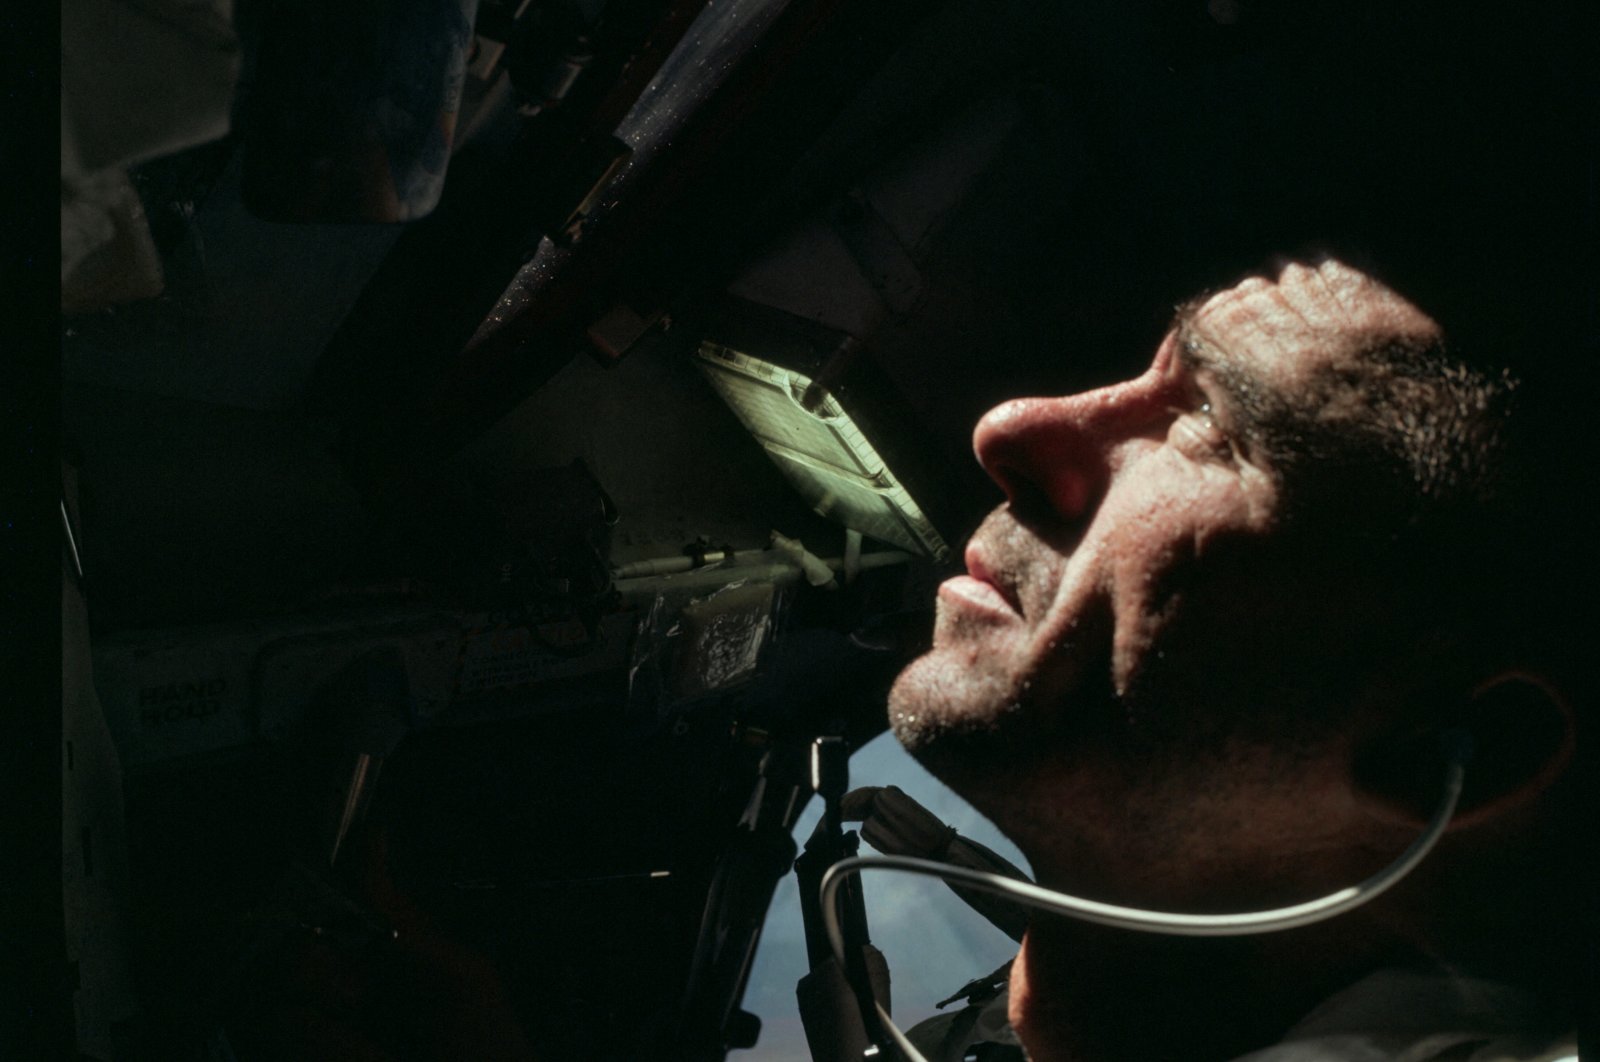 Astronaut Walter Cunningham, Apollo 7 lunar module pilot, is photographed during the Apollo 7 mission, in October 1968. (Reuters Photo)